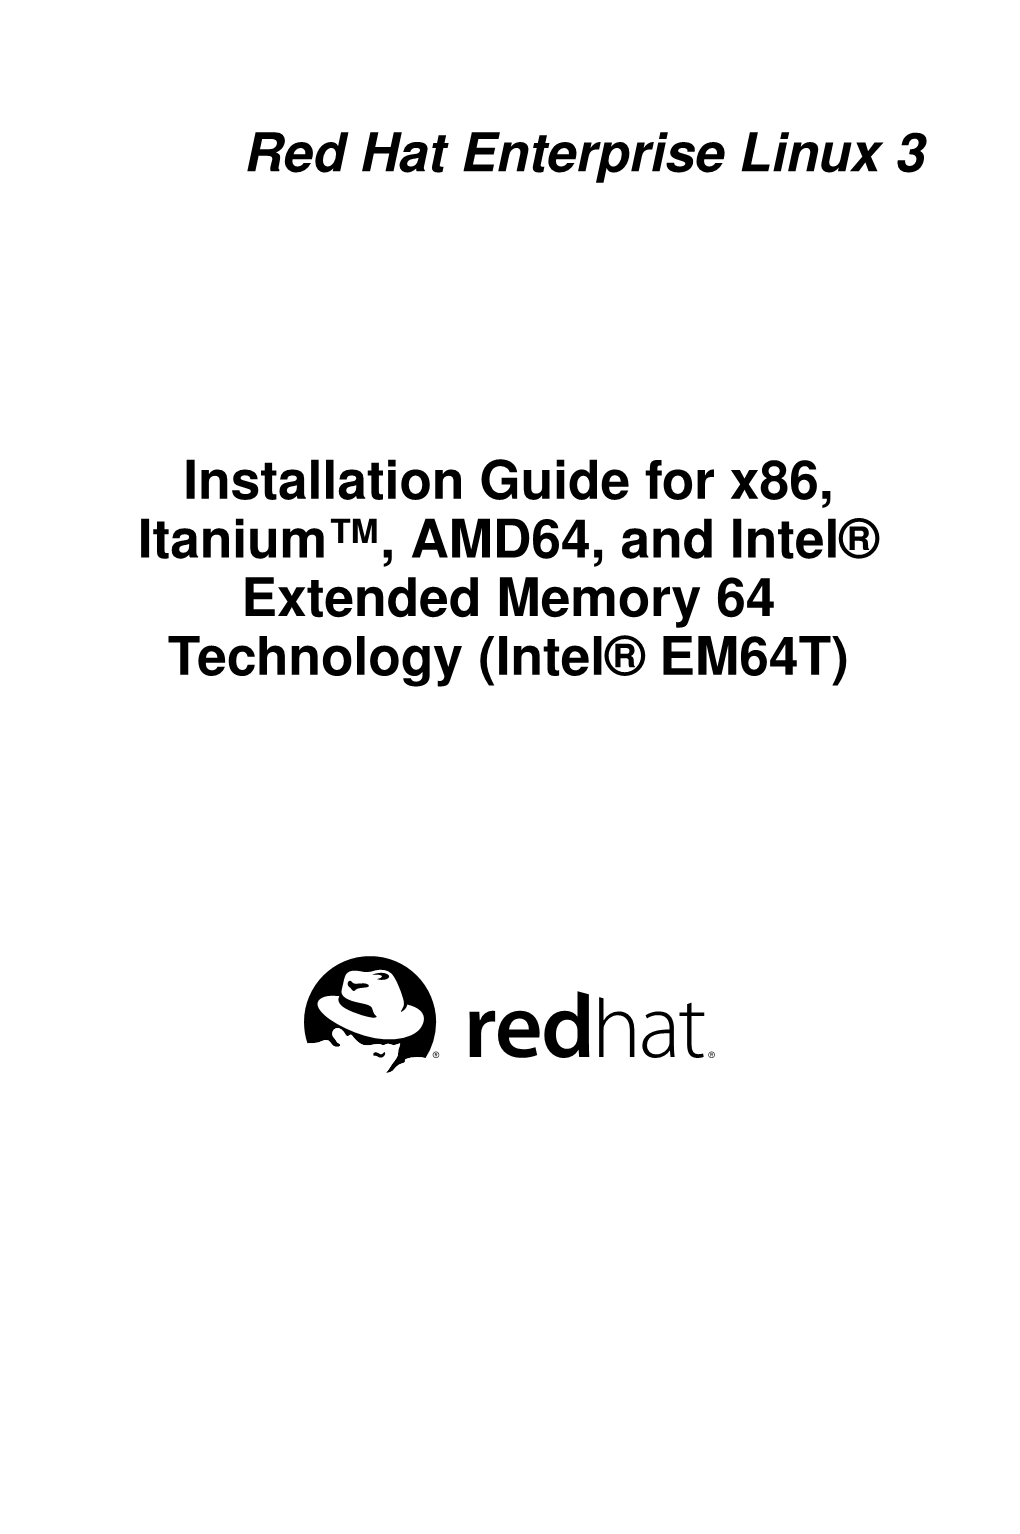 Red Hat Enterprise Linux 3 Installation Guide for X86